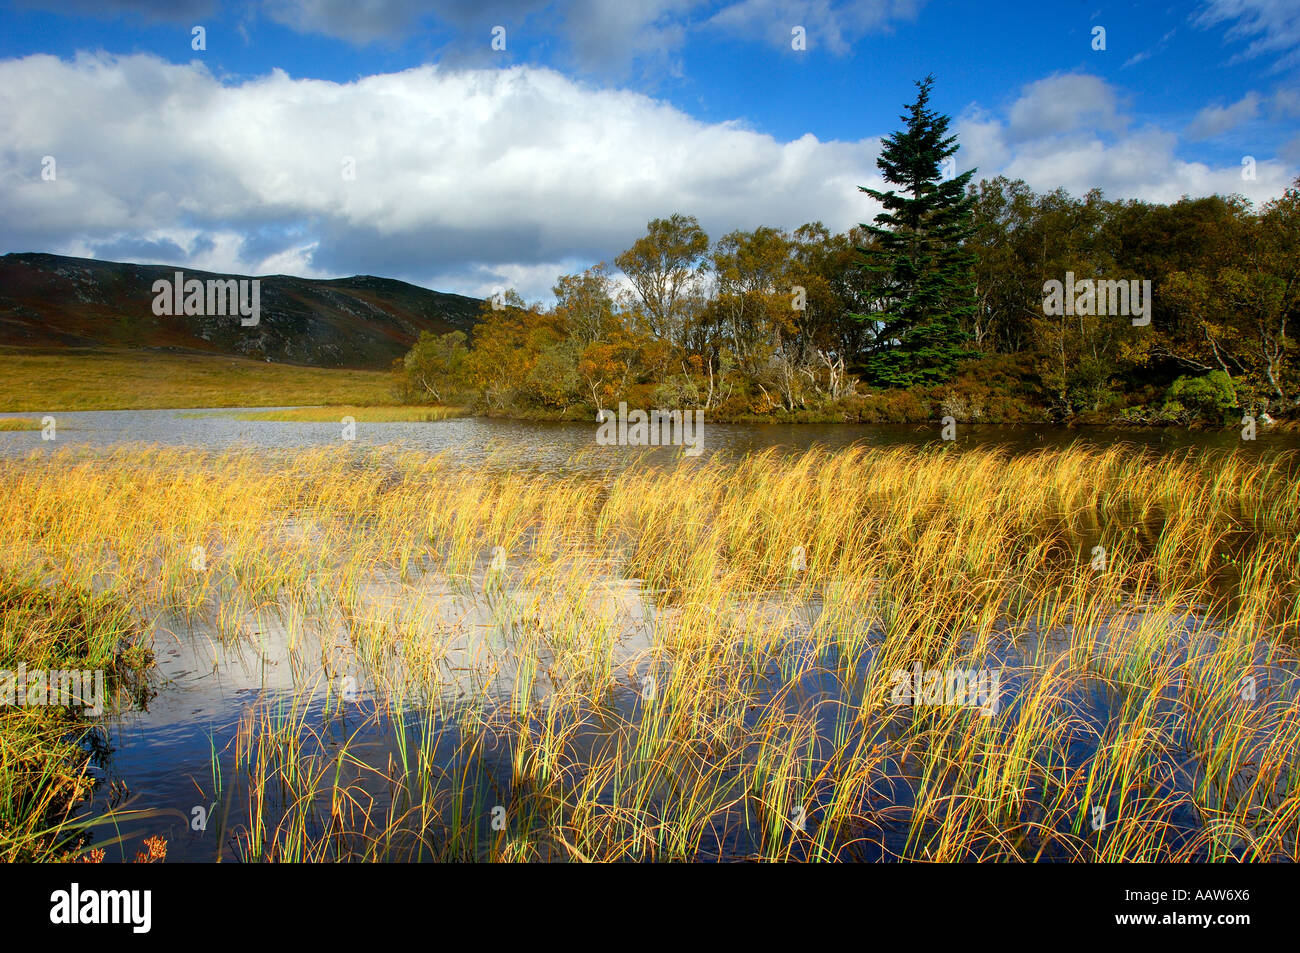 Tranquil image of Loch Tarff in the Scottish highlands with golden grasses protruding from the surface of the water Stock Photo